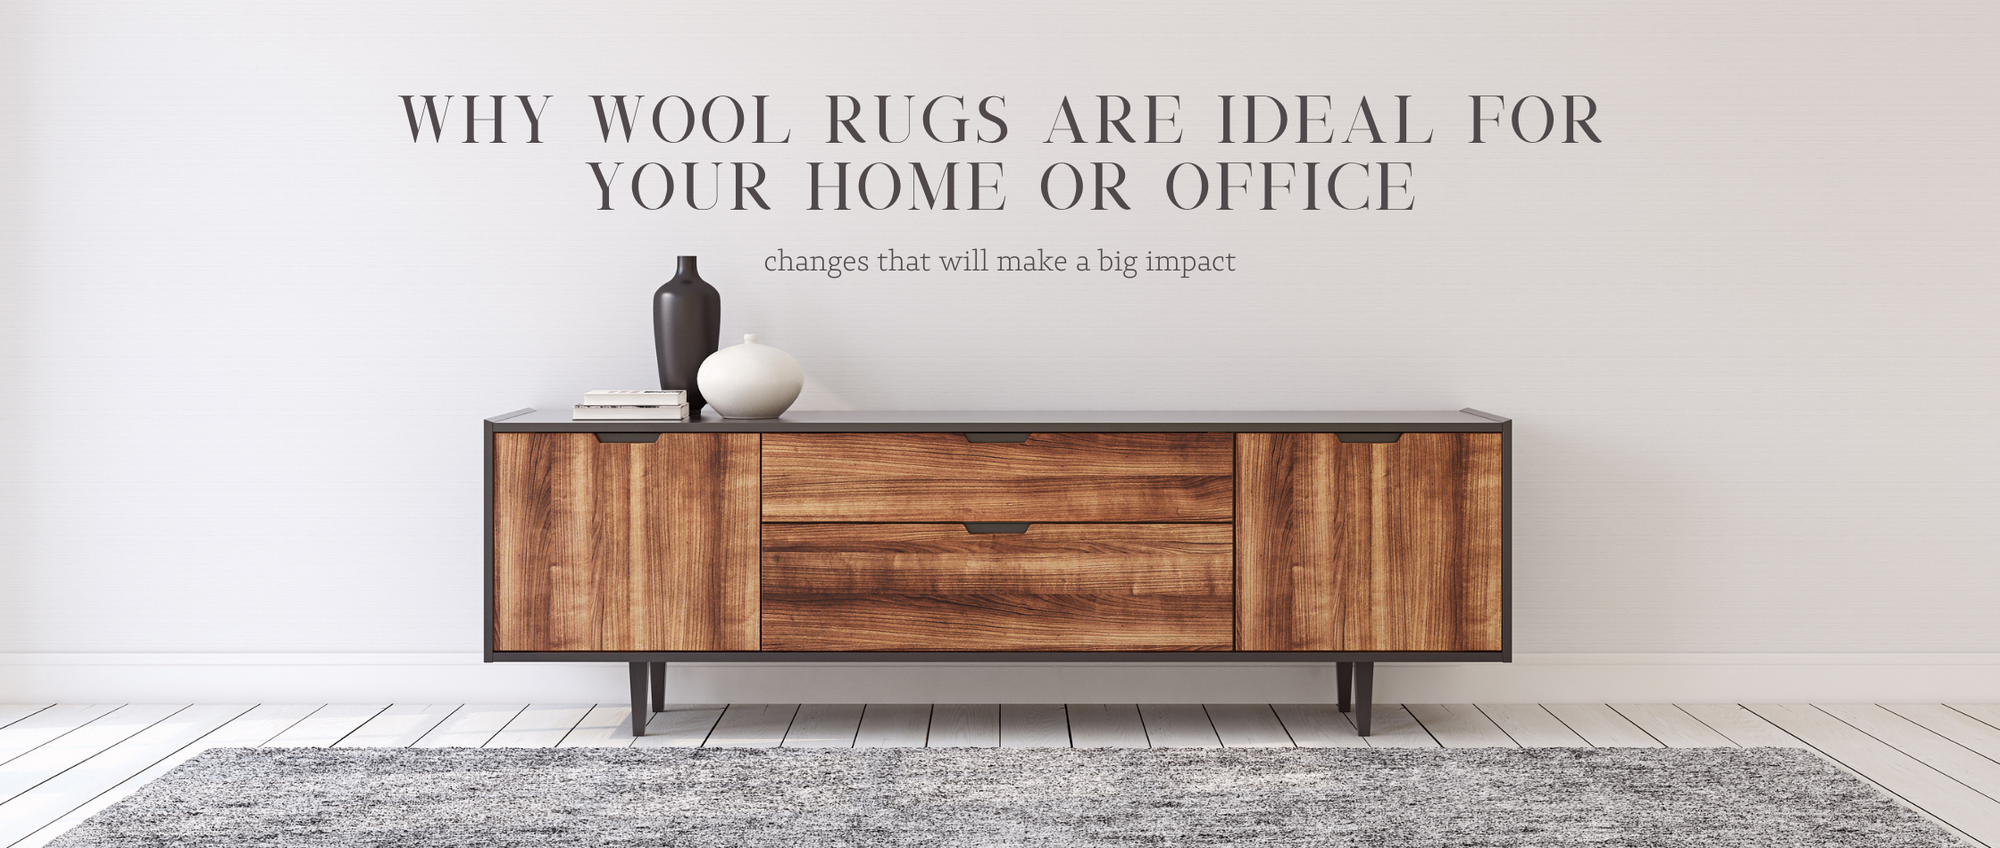 Why Wool Rugs are Ideal for Your Home or Office